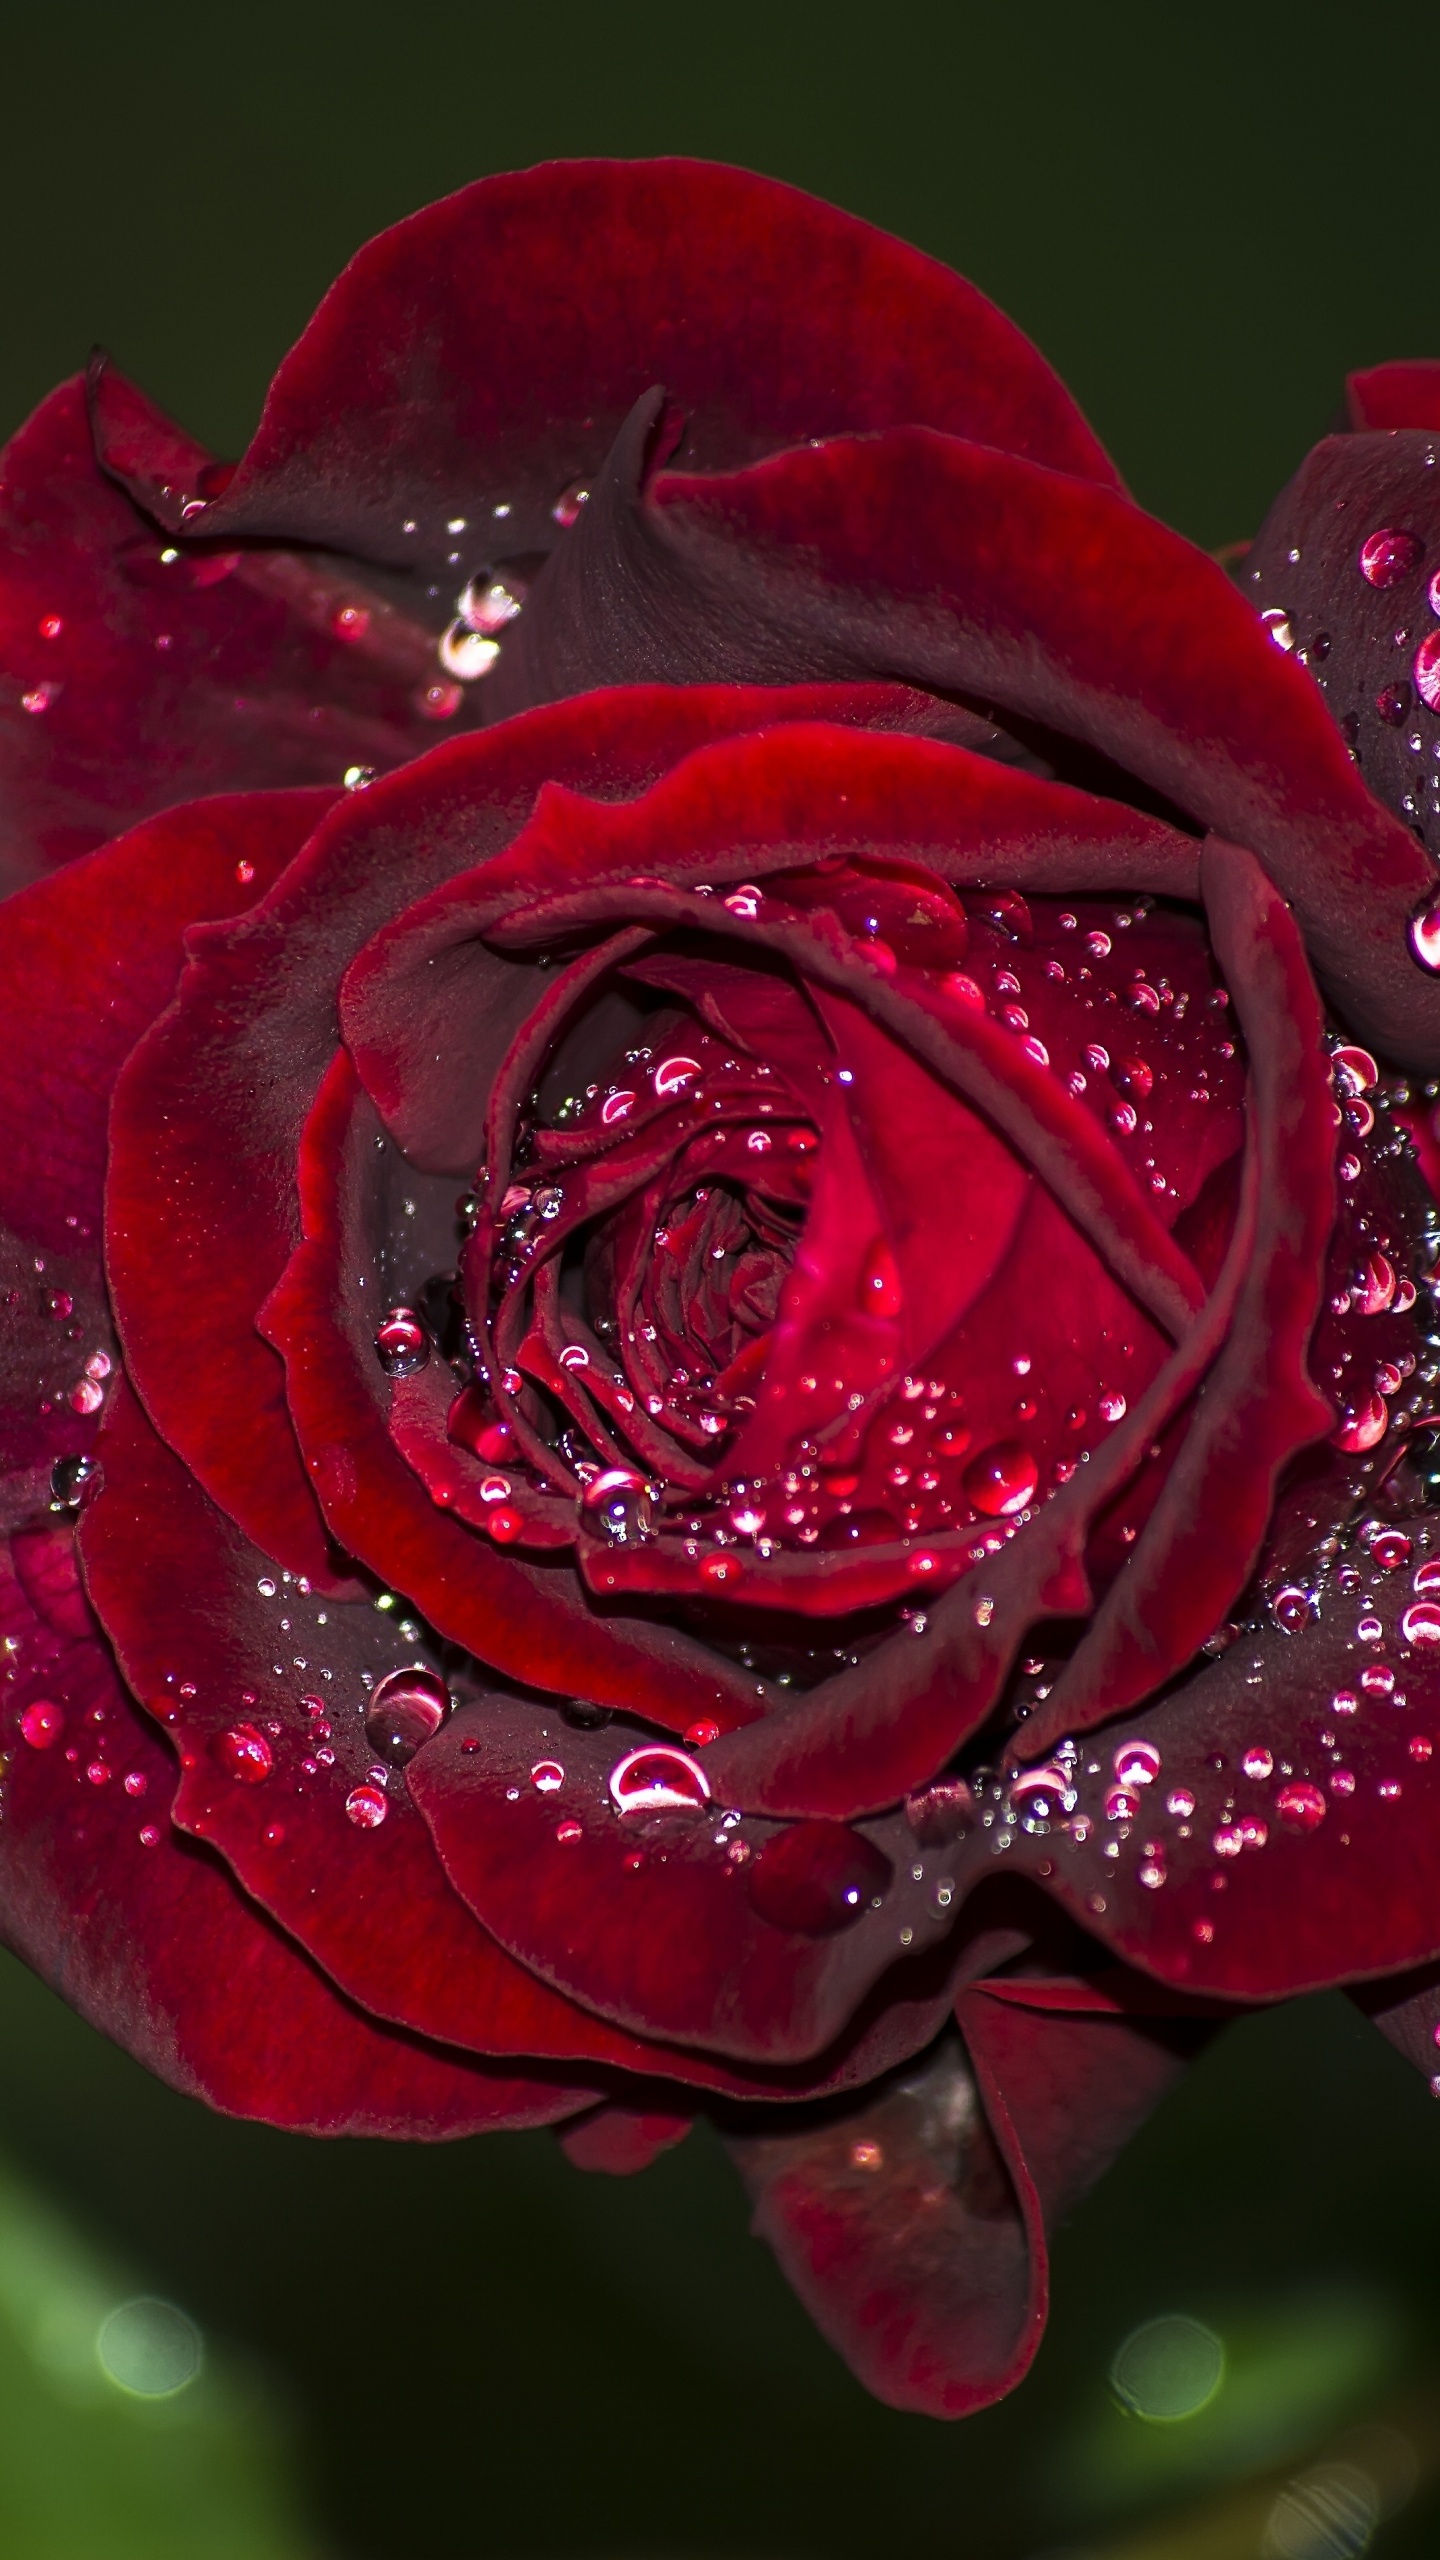 Red Rose in Bloom With Dew Drops. Wallpaper in 1440x2560 Resolution